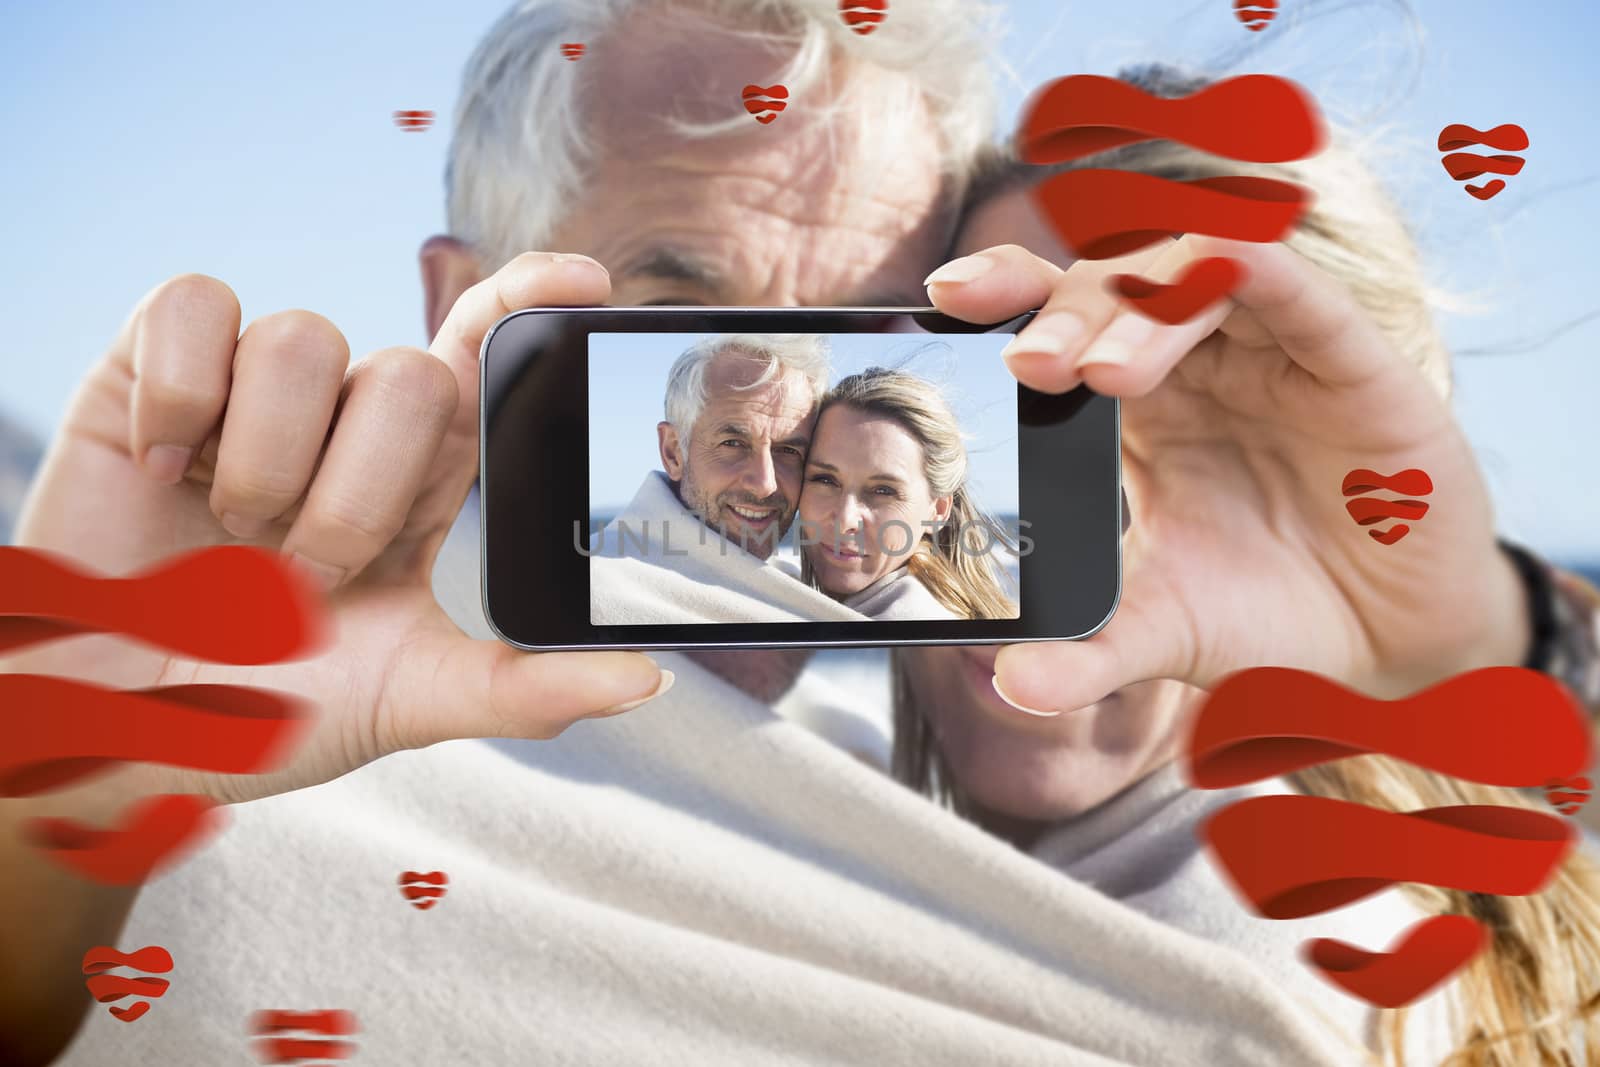 Composite image of valentines couple taking a selfie